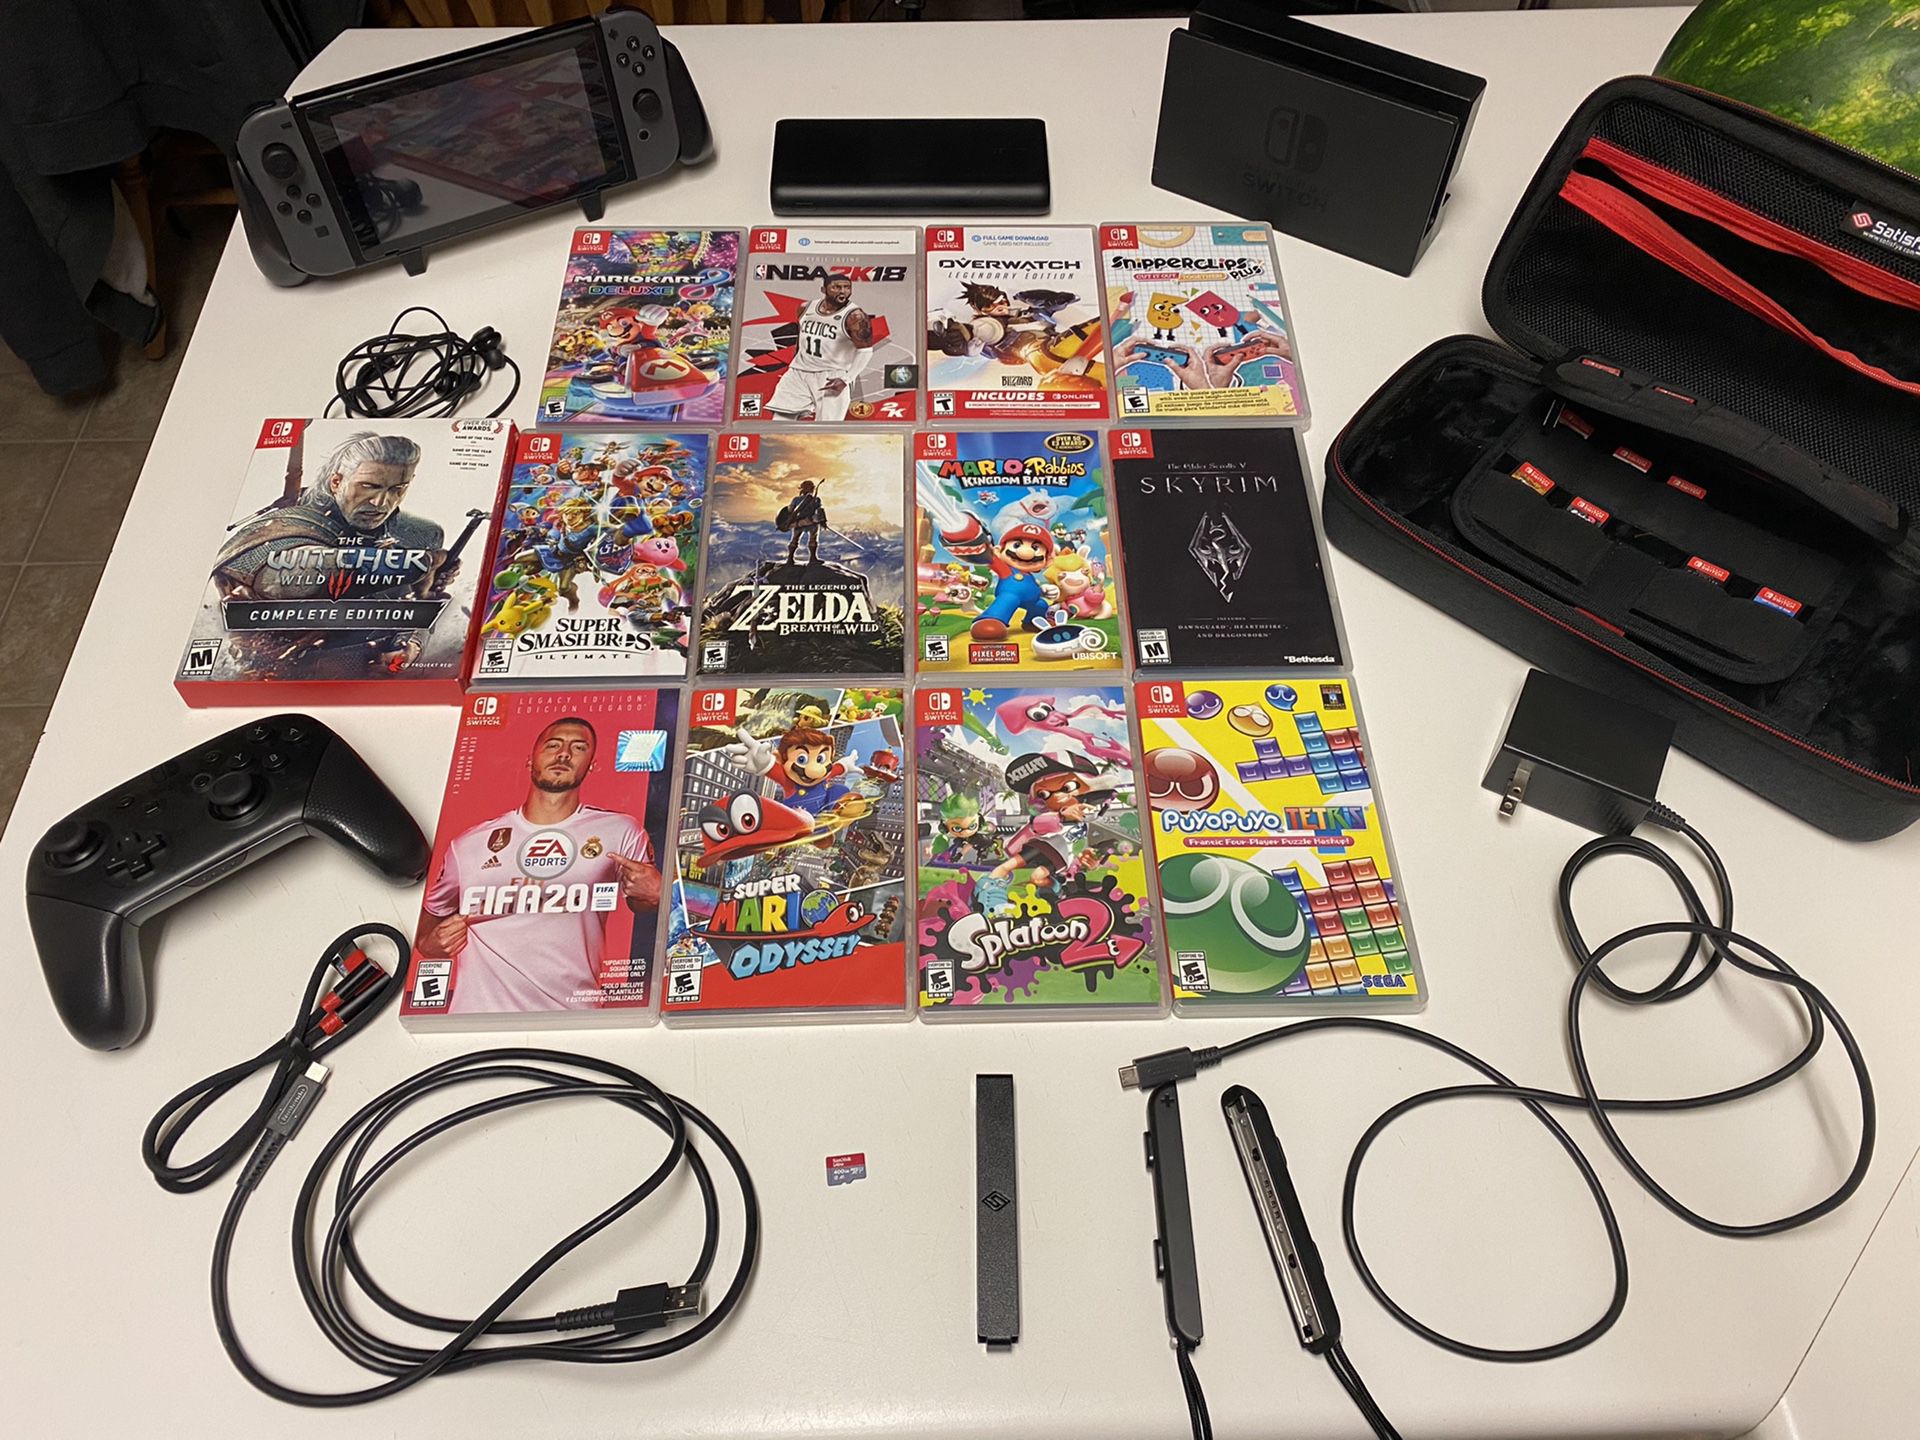 Nintendo switch with accessories and games